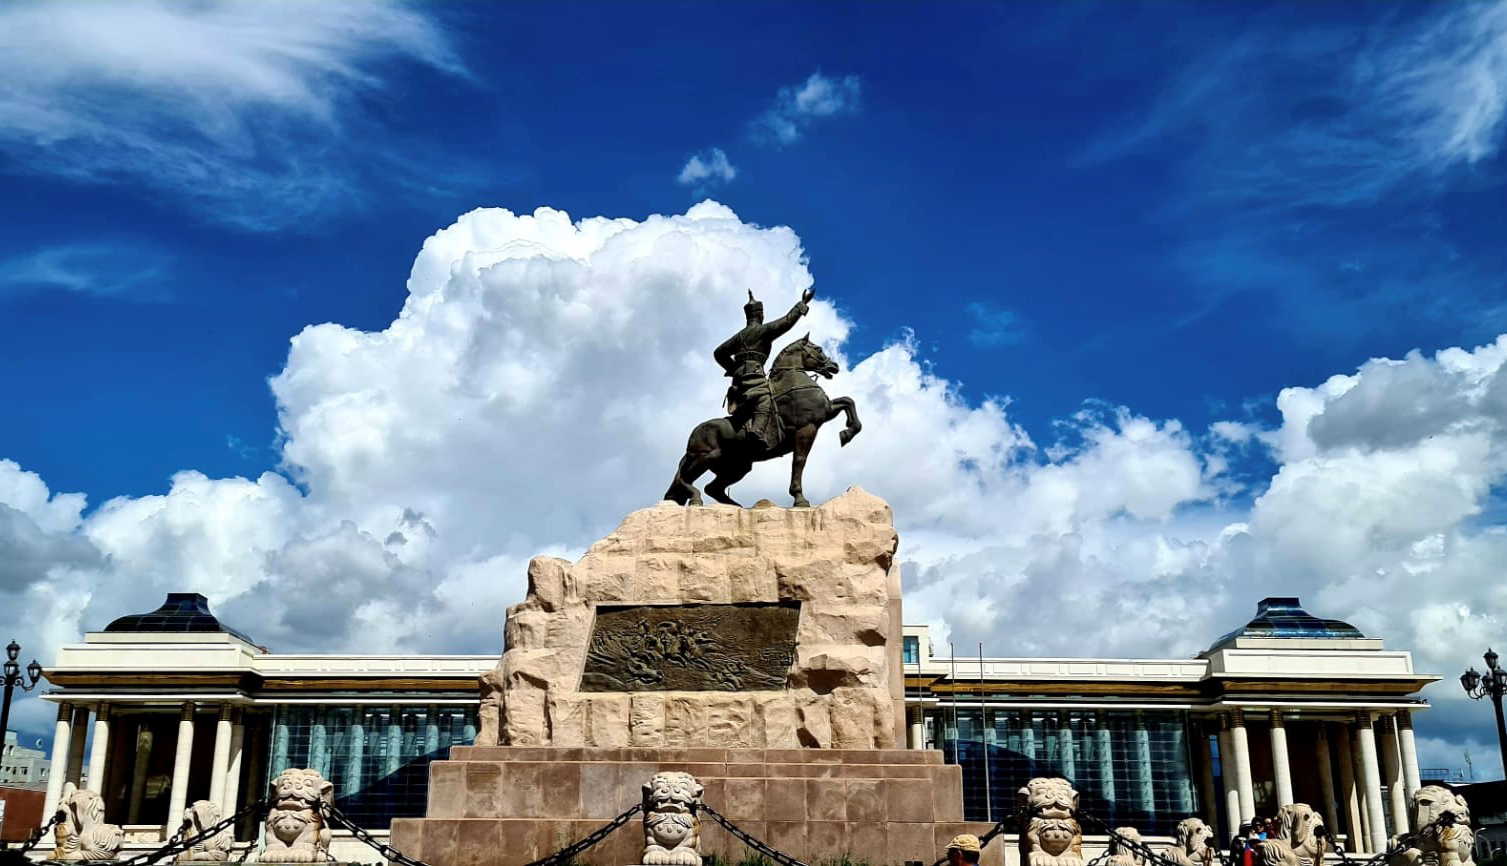 At the heart of Ulaanbaatar, the statue of Damdin Sükhbaatar honours his pivotal role in securing independence from China in 1921.